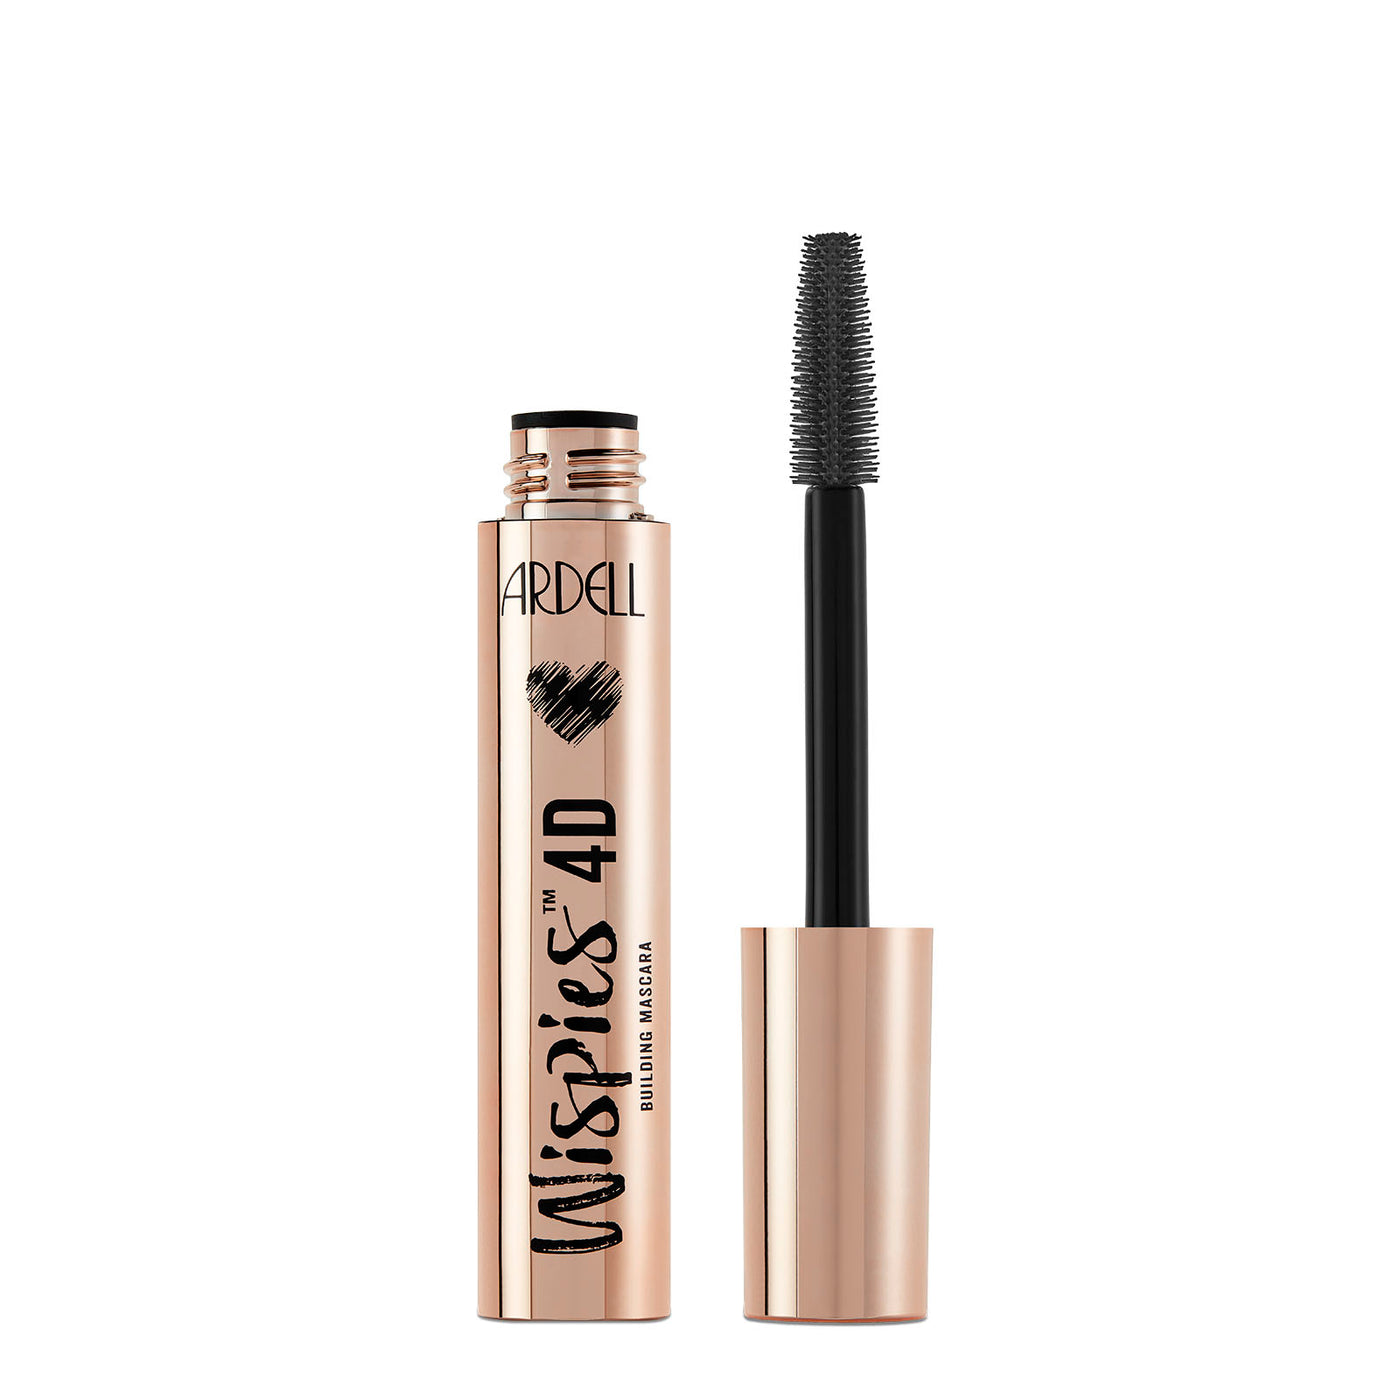 Ardell Wispies 4D Building Mascara